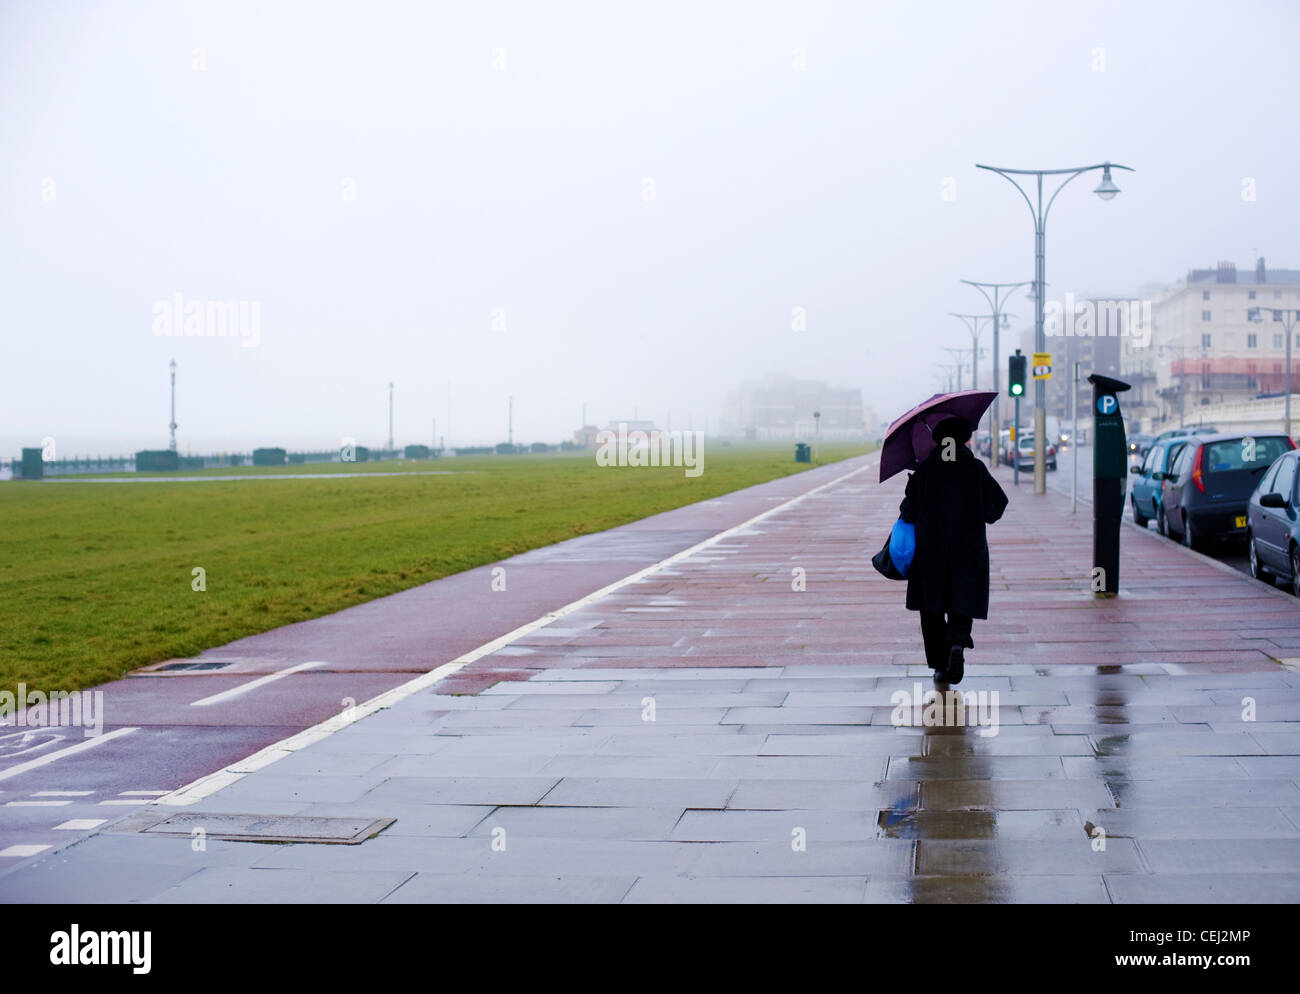 A woman walking with an umbrella on a rainy and windy day on the seafront, at Hove Lawns, Brighton and Hove, East Sussex, England, UK Stock Photo